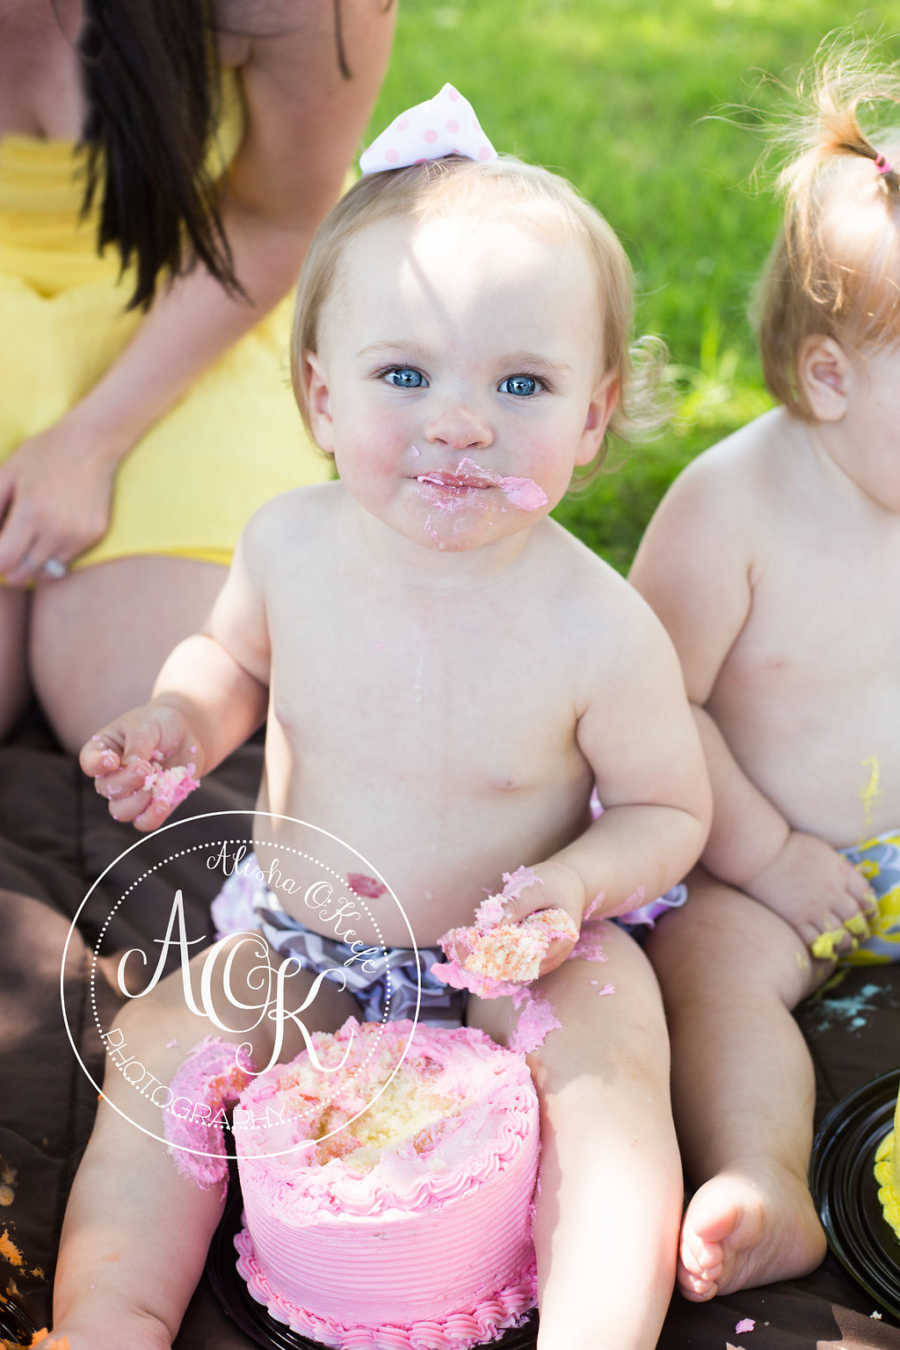 Infant with pink cake in front of her and frosting on her hands and mouth